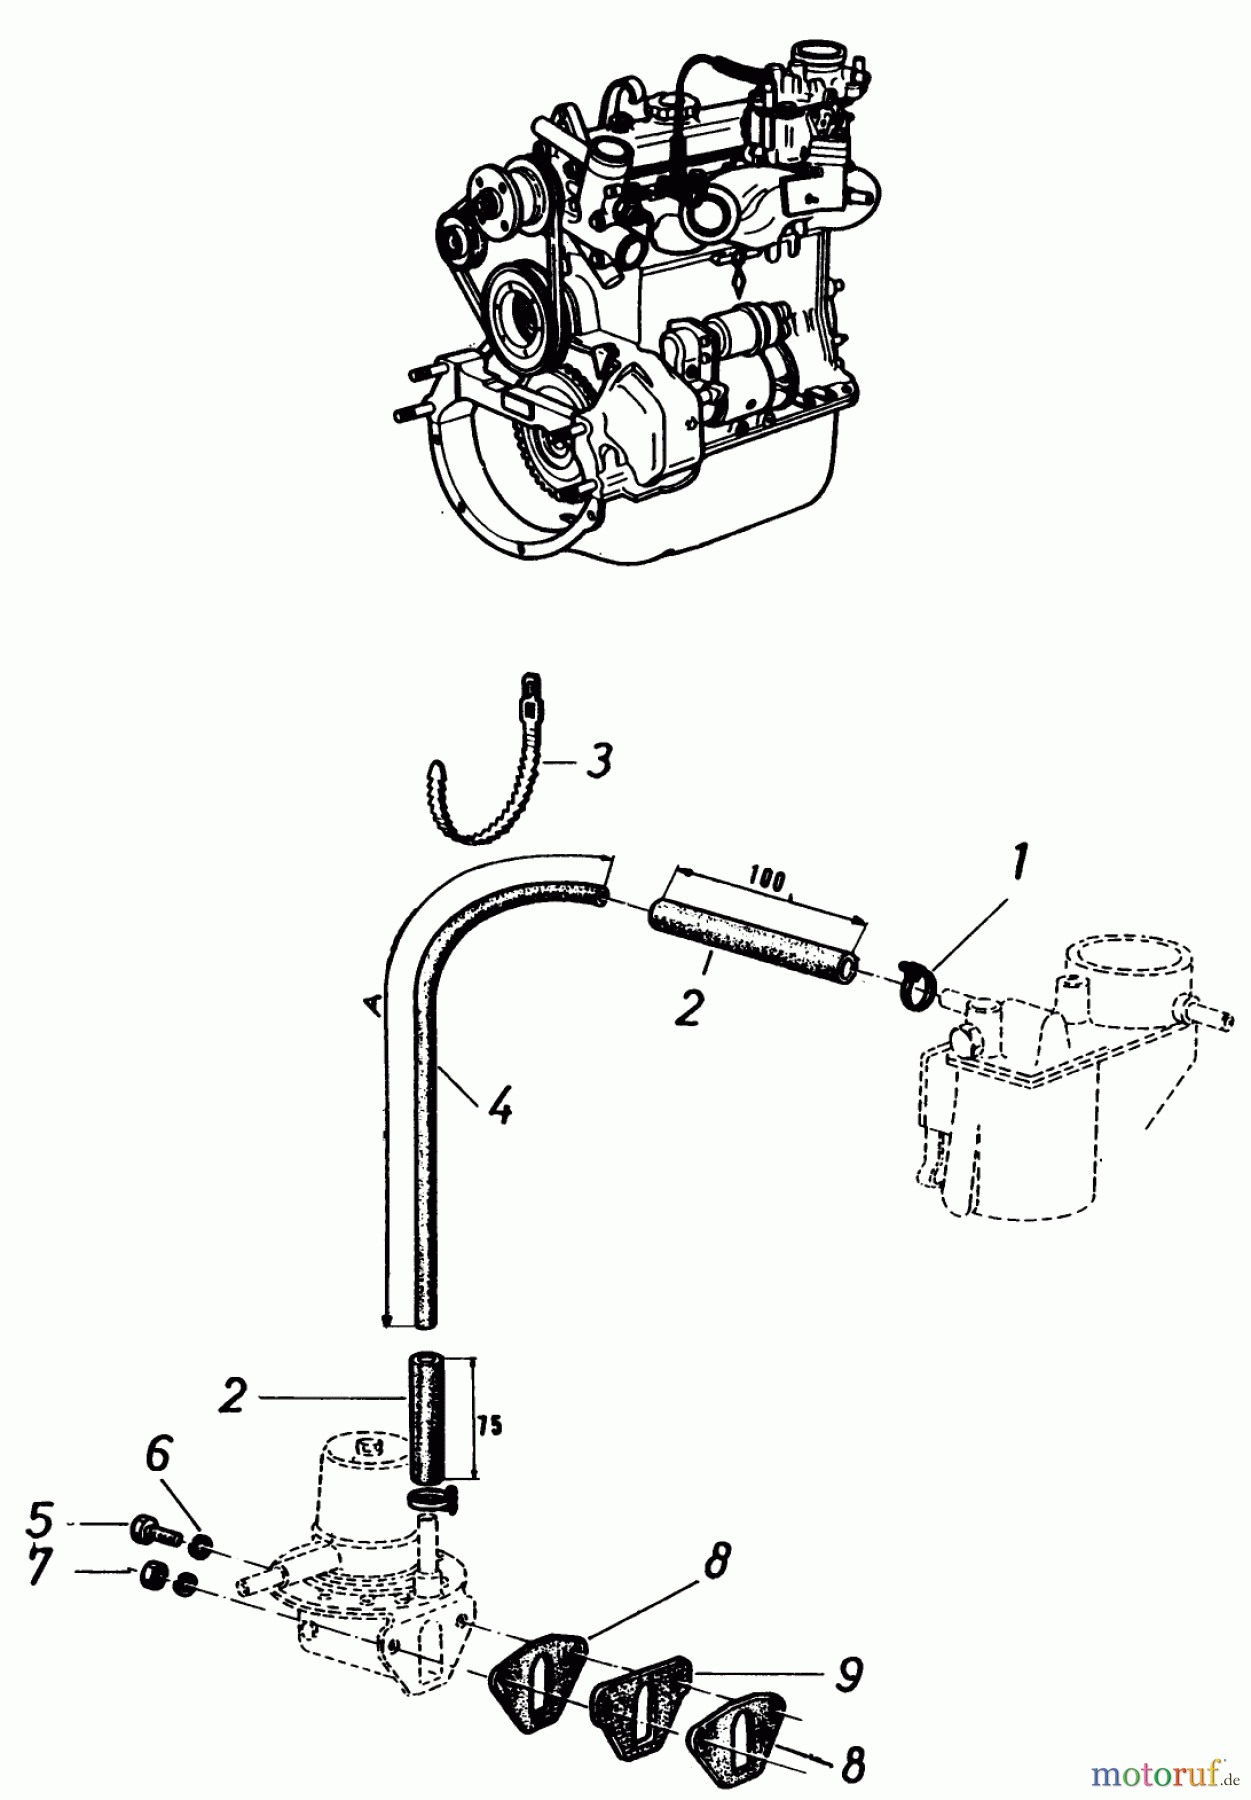  Toro Neu Mowers, Lawn & Garden Tractor Seite 2 91-20RG01 (D-250) - Toro D-250 10-Speed Tractor, 1979 ENGINE FUEL LINES AND FUEL PUMP MOUNTING HARDWARE